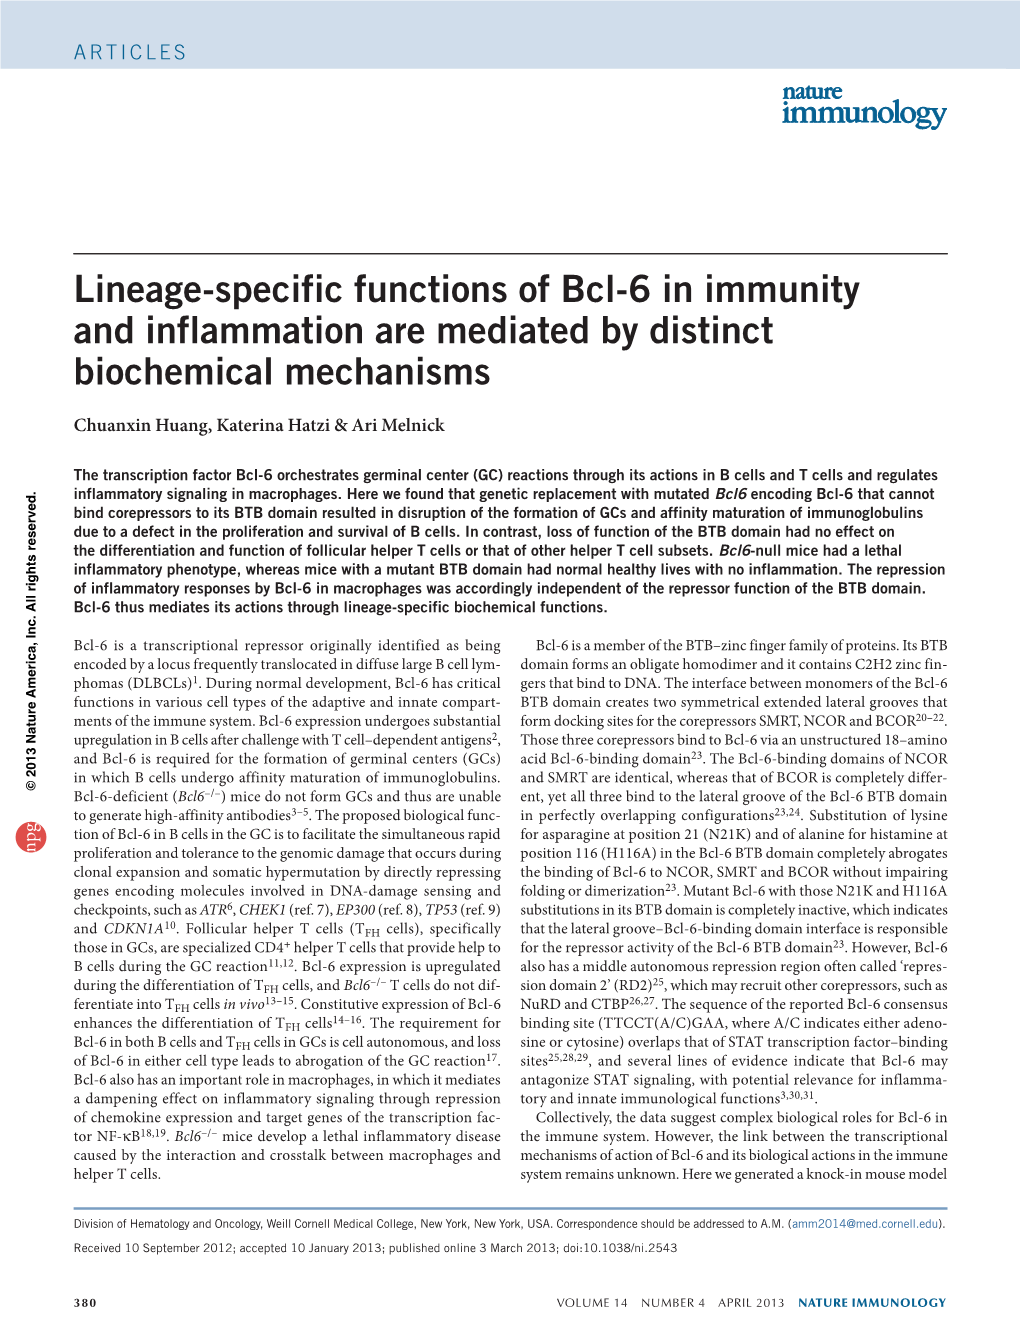 Lineage-Specific Functions of Bcl-6 in Immunity and Inflammation Are Mediated by Distinct Biochemical Mechanisms